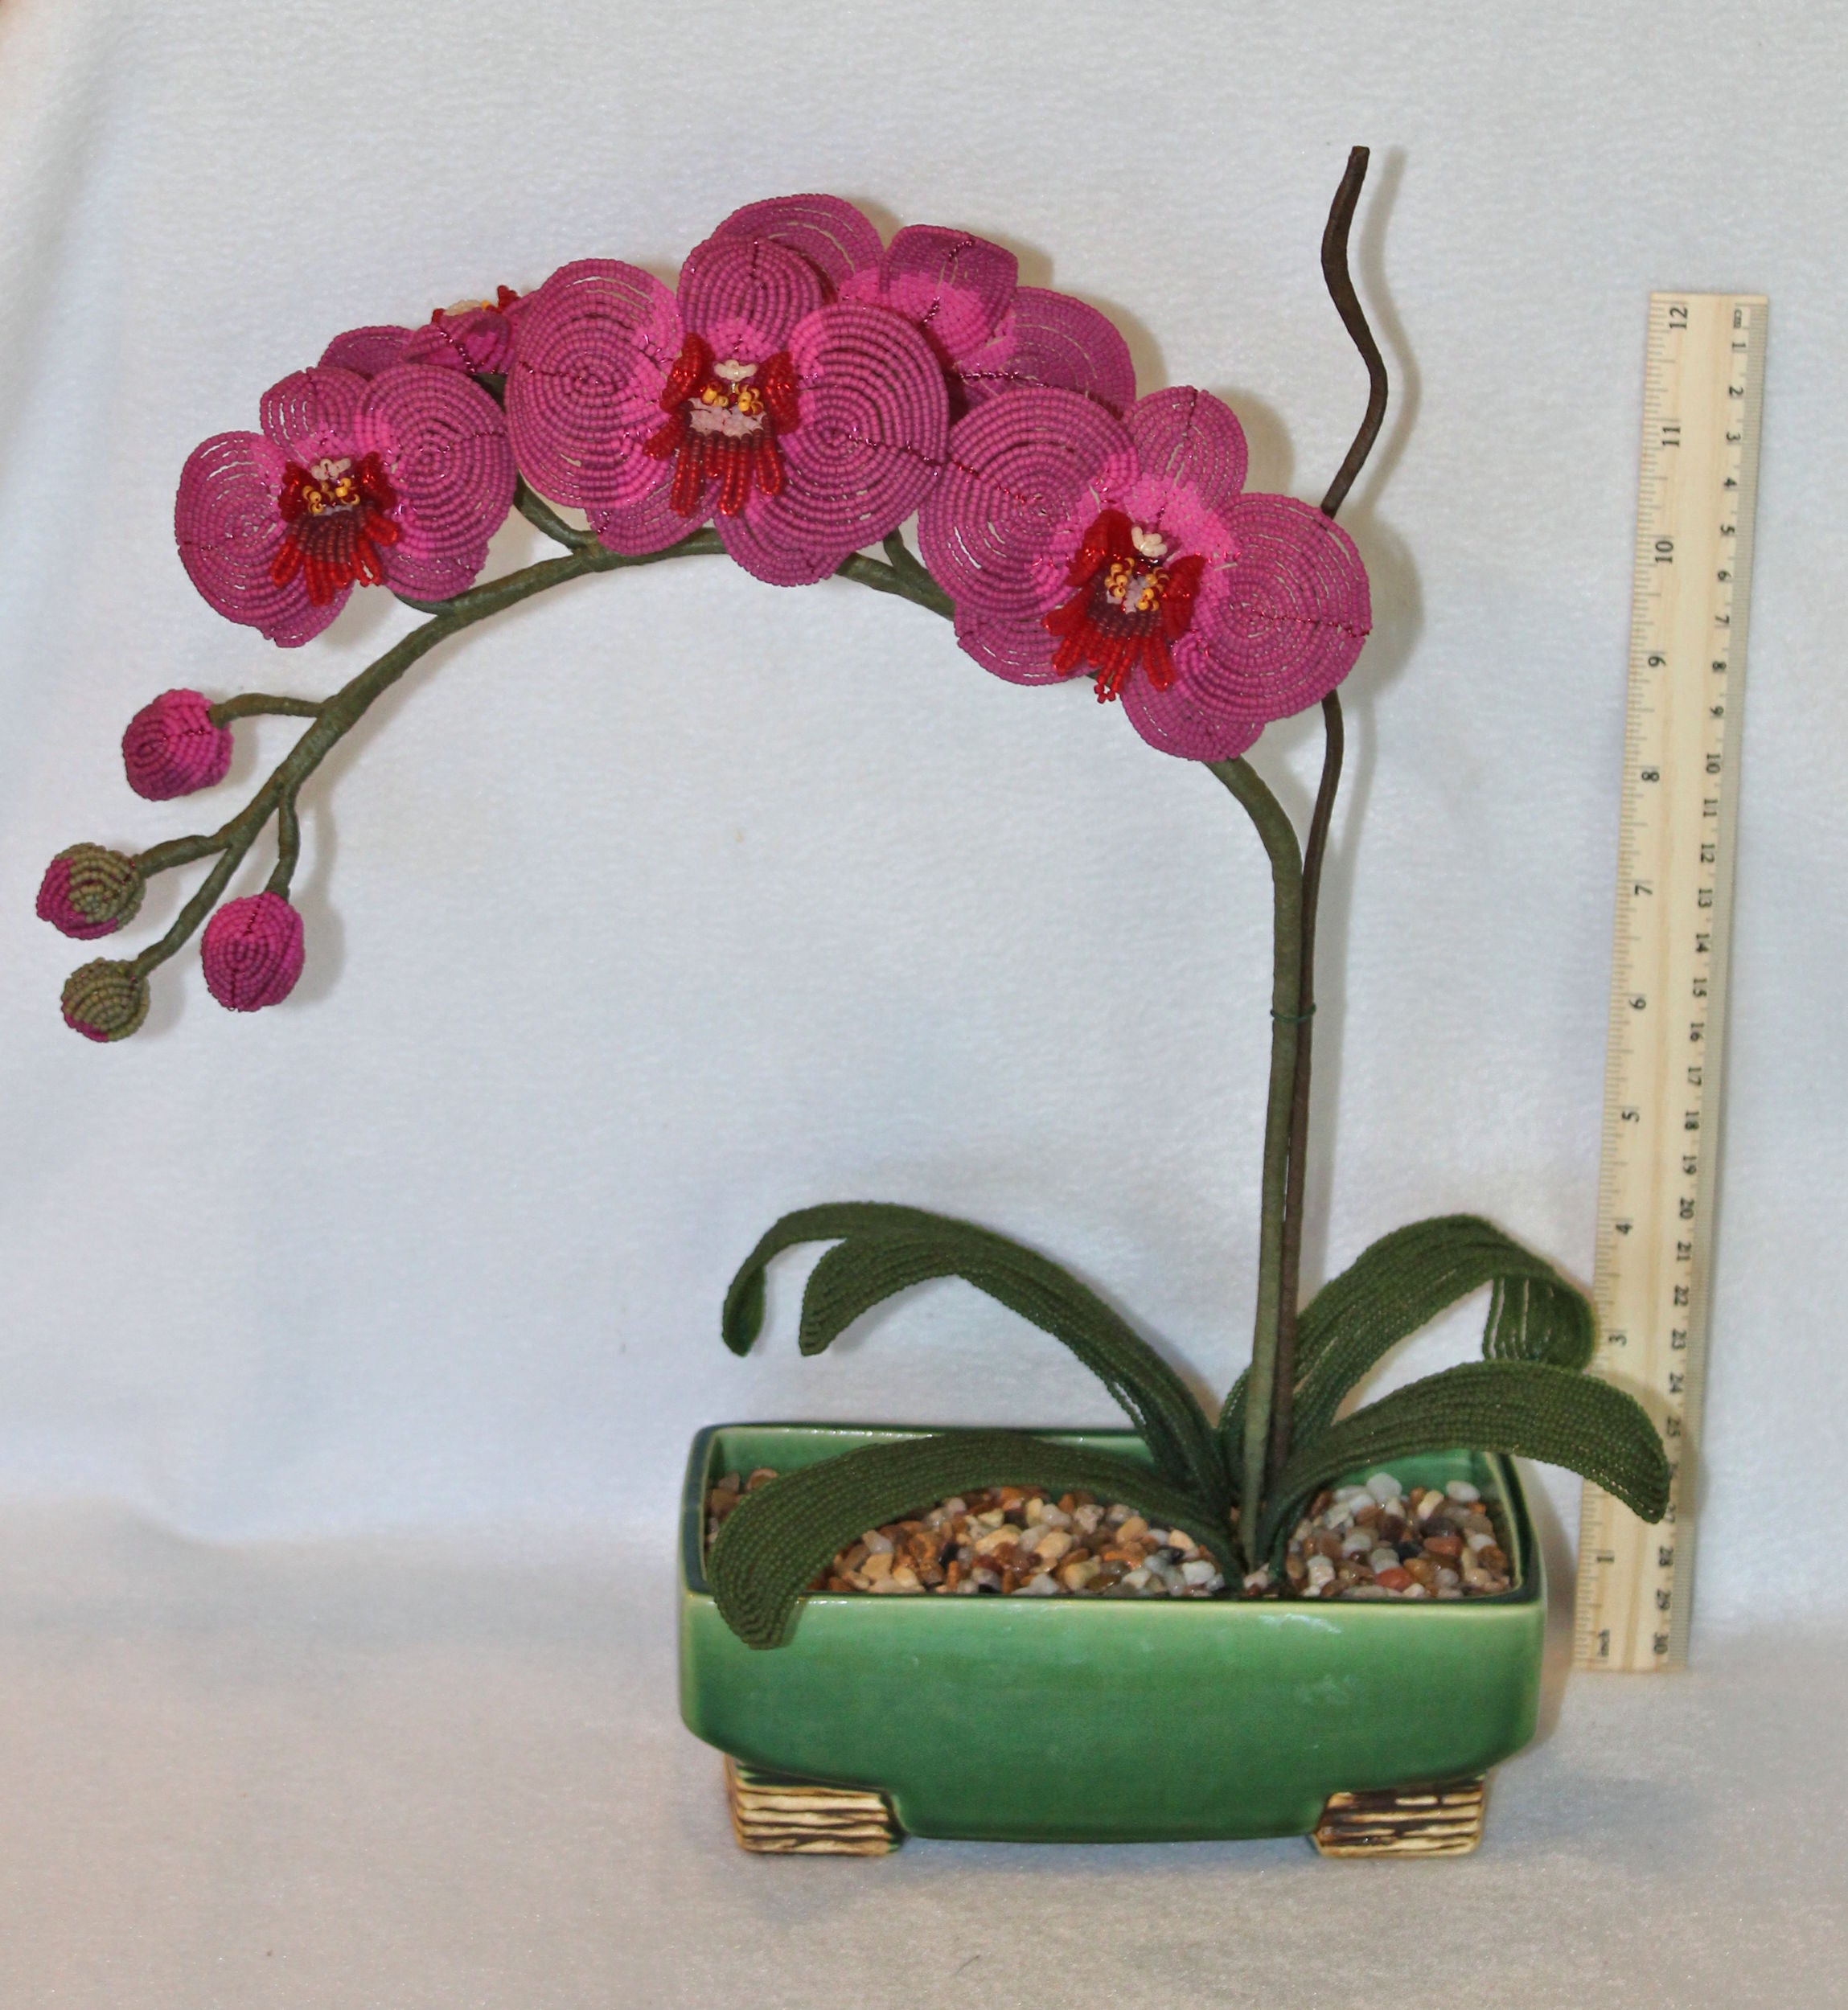 Vibrant Pink Moth Orchid (Phalaenopsis) - SOLD